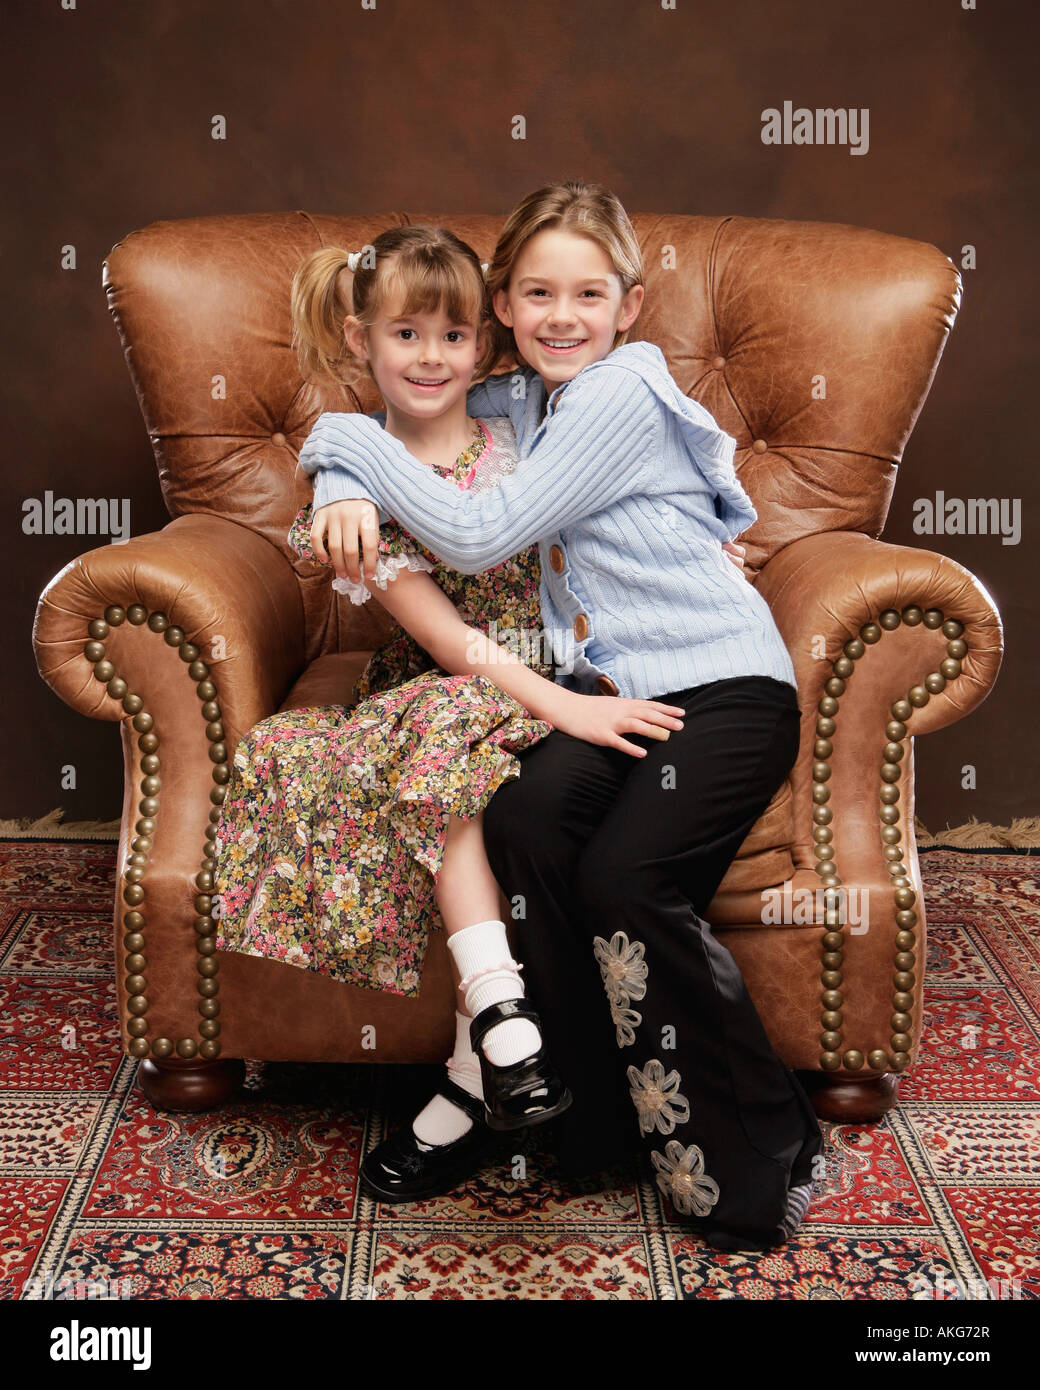 Two girls sitting in armchair Stock Photo